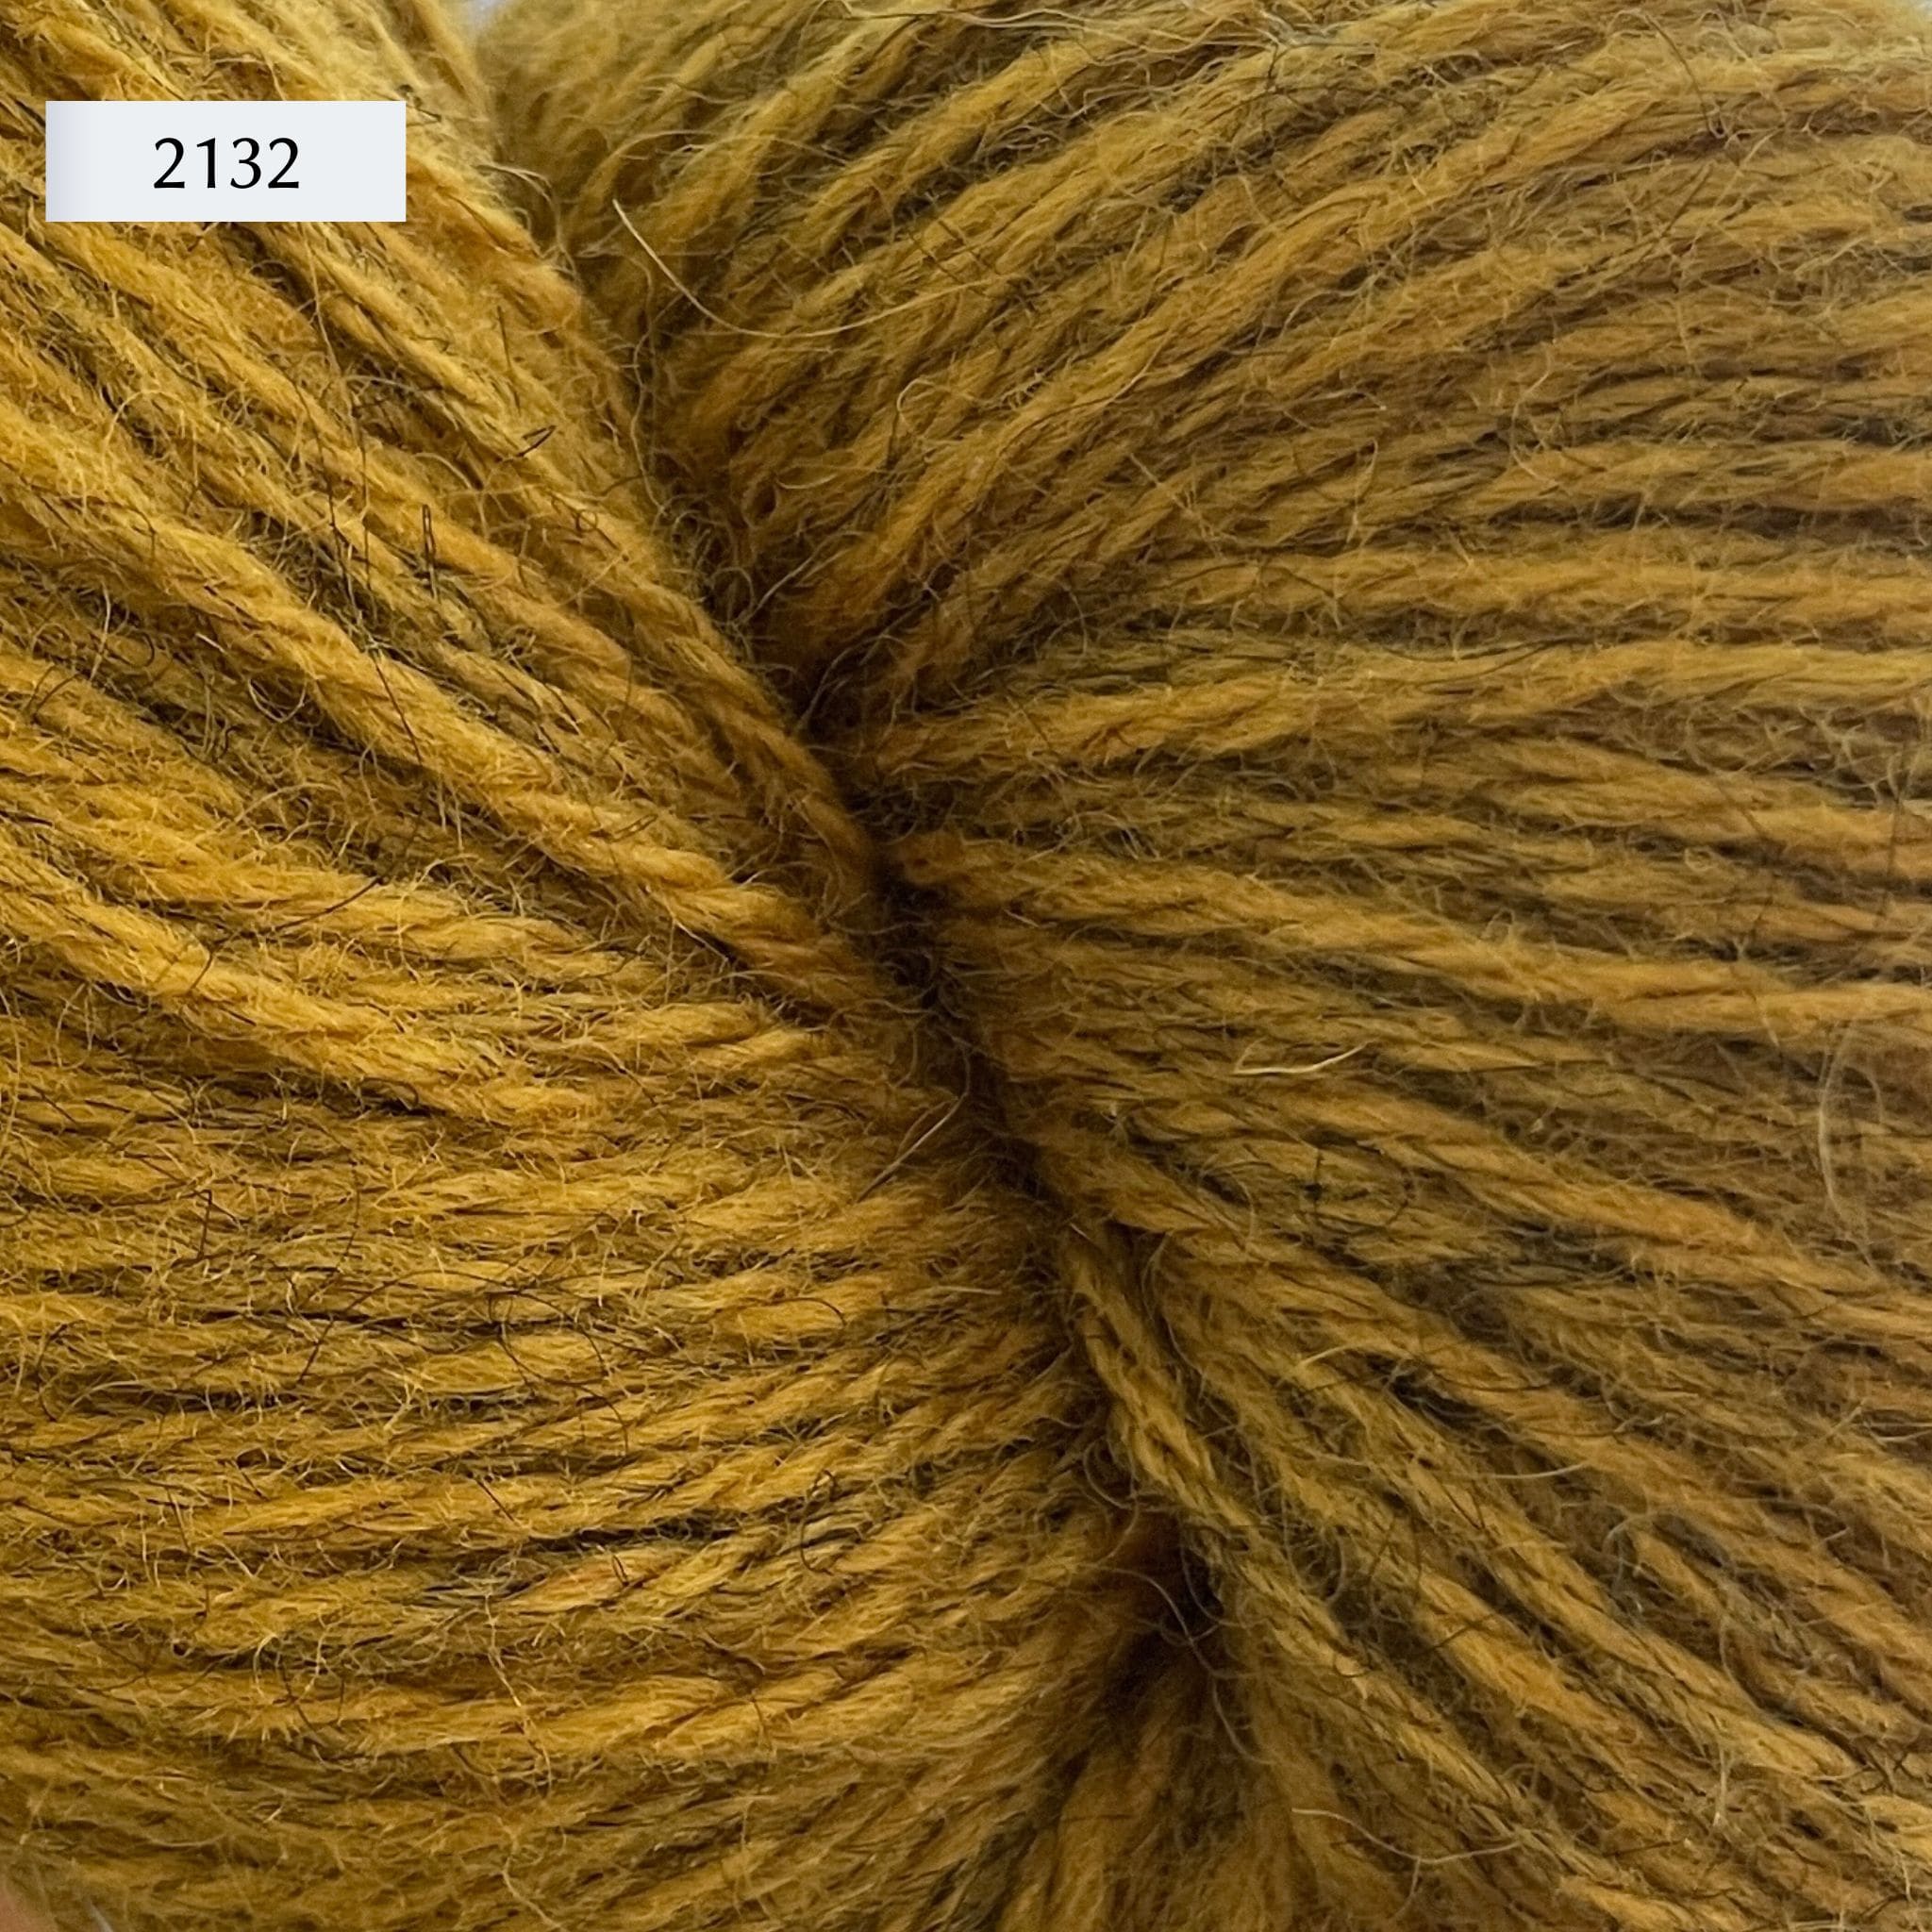 Ullcentrum 3ply, a worsted weight wool yarn, in color 2132, a heathered gold yellow